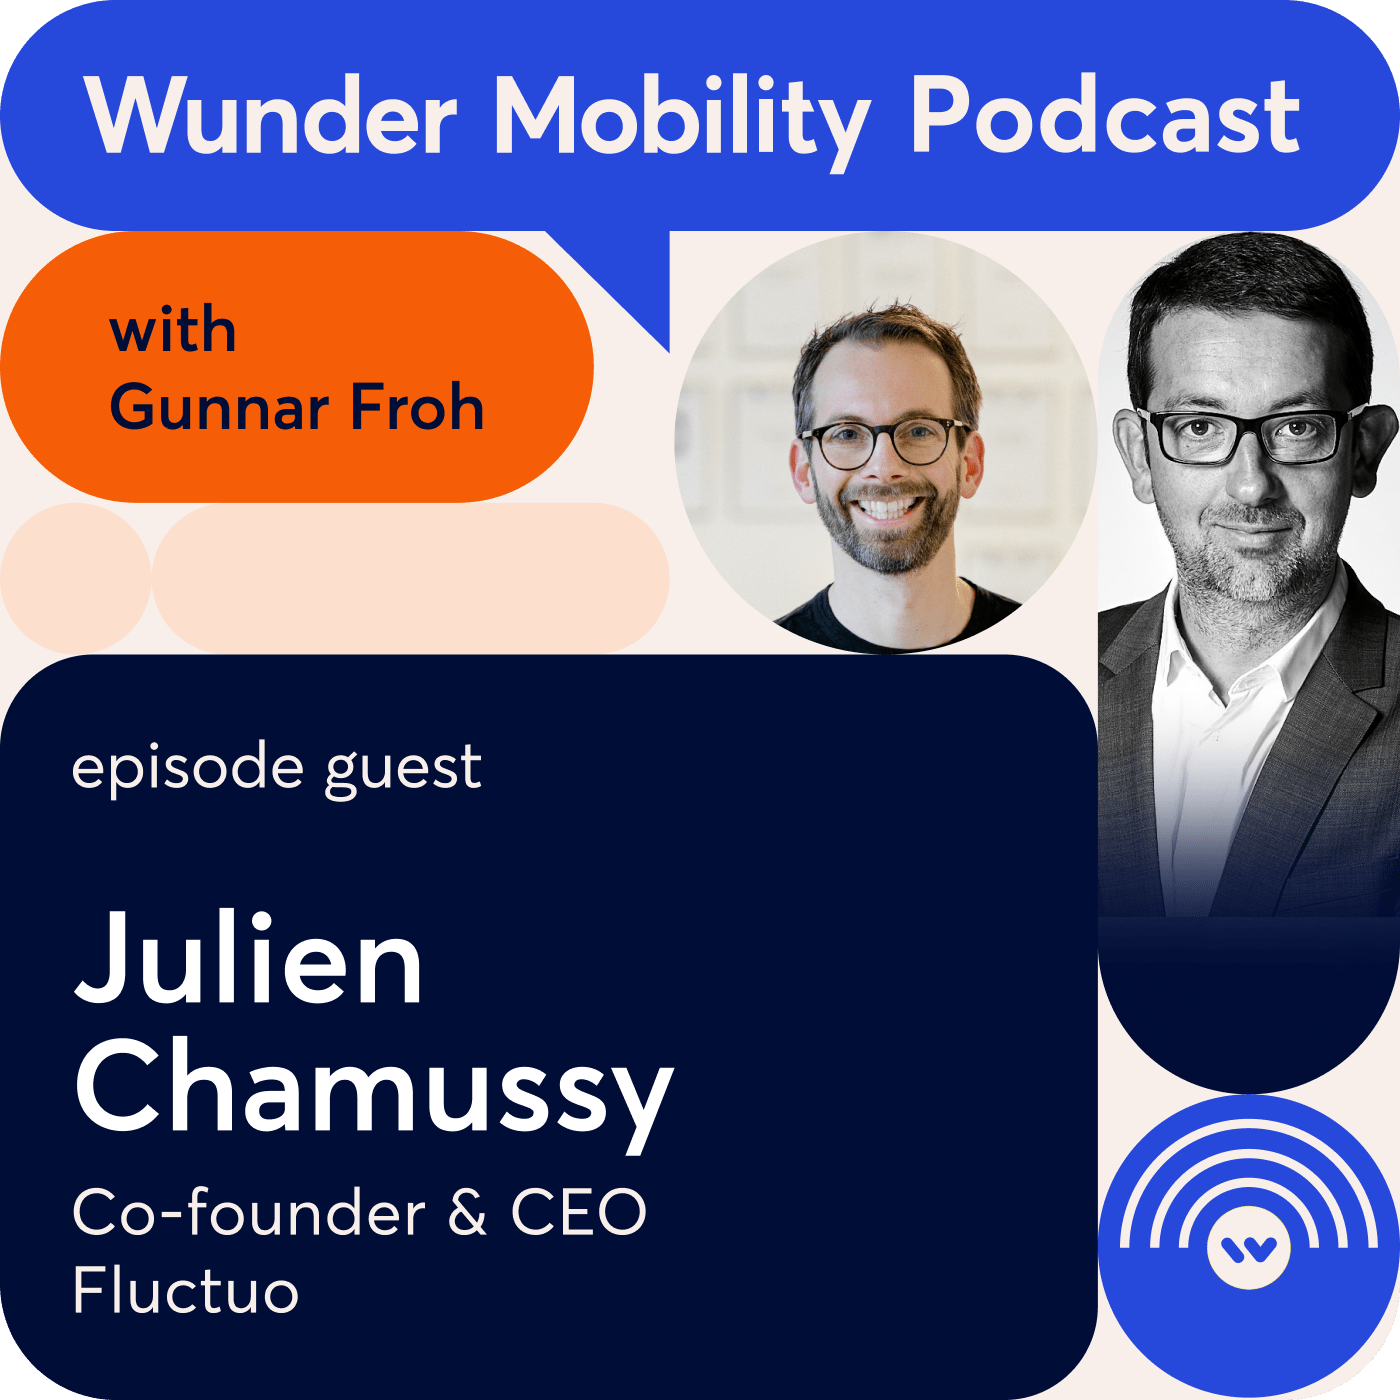 #38 Julien Chamussy, Co-founder & CEO, fluctuo